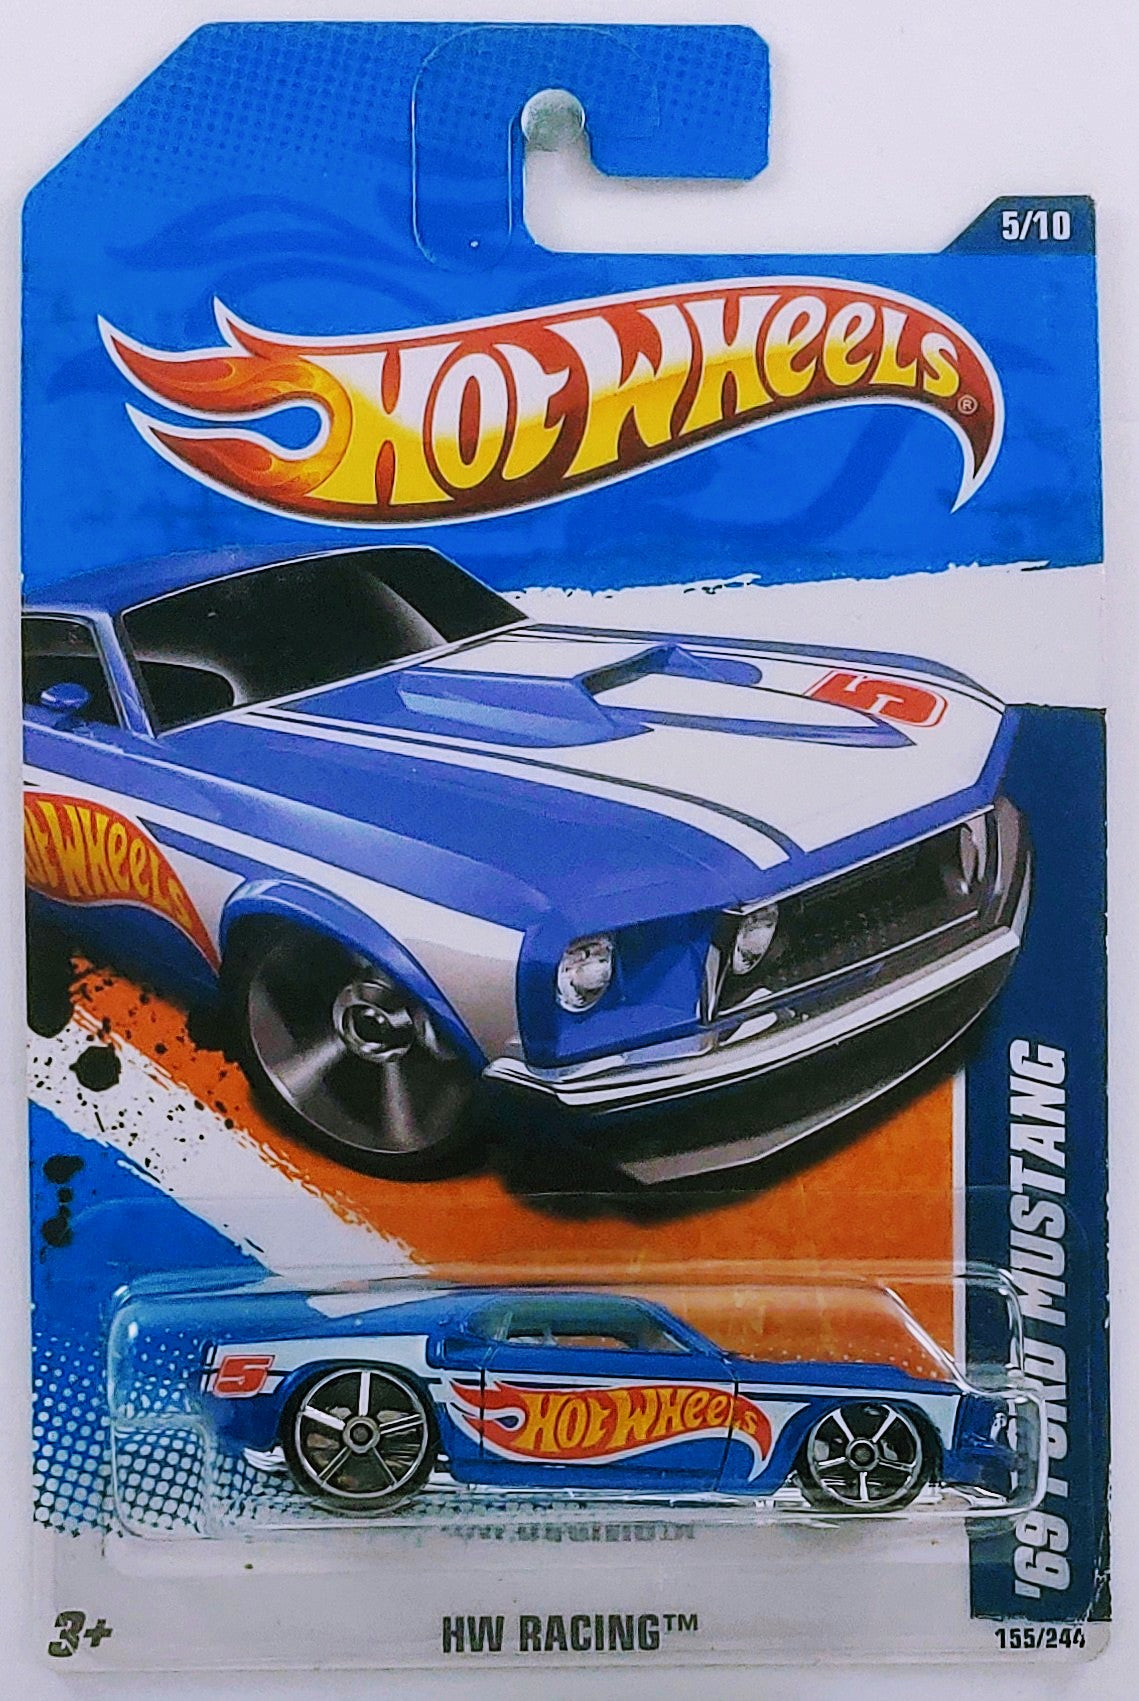 Hot Wheels 2011 - Collector # 15.5/244 - HW Racing 5/10 - '69 Ford Mustang - Blue / HW Graphics - USA